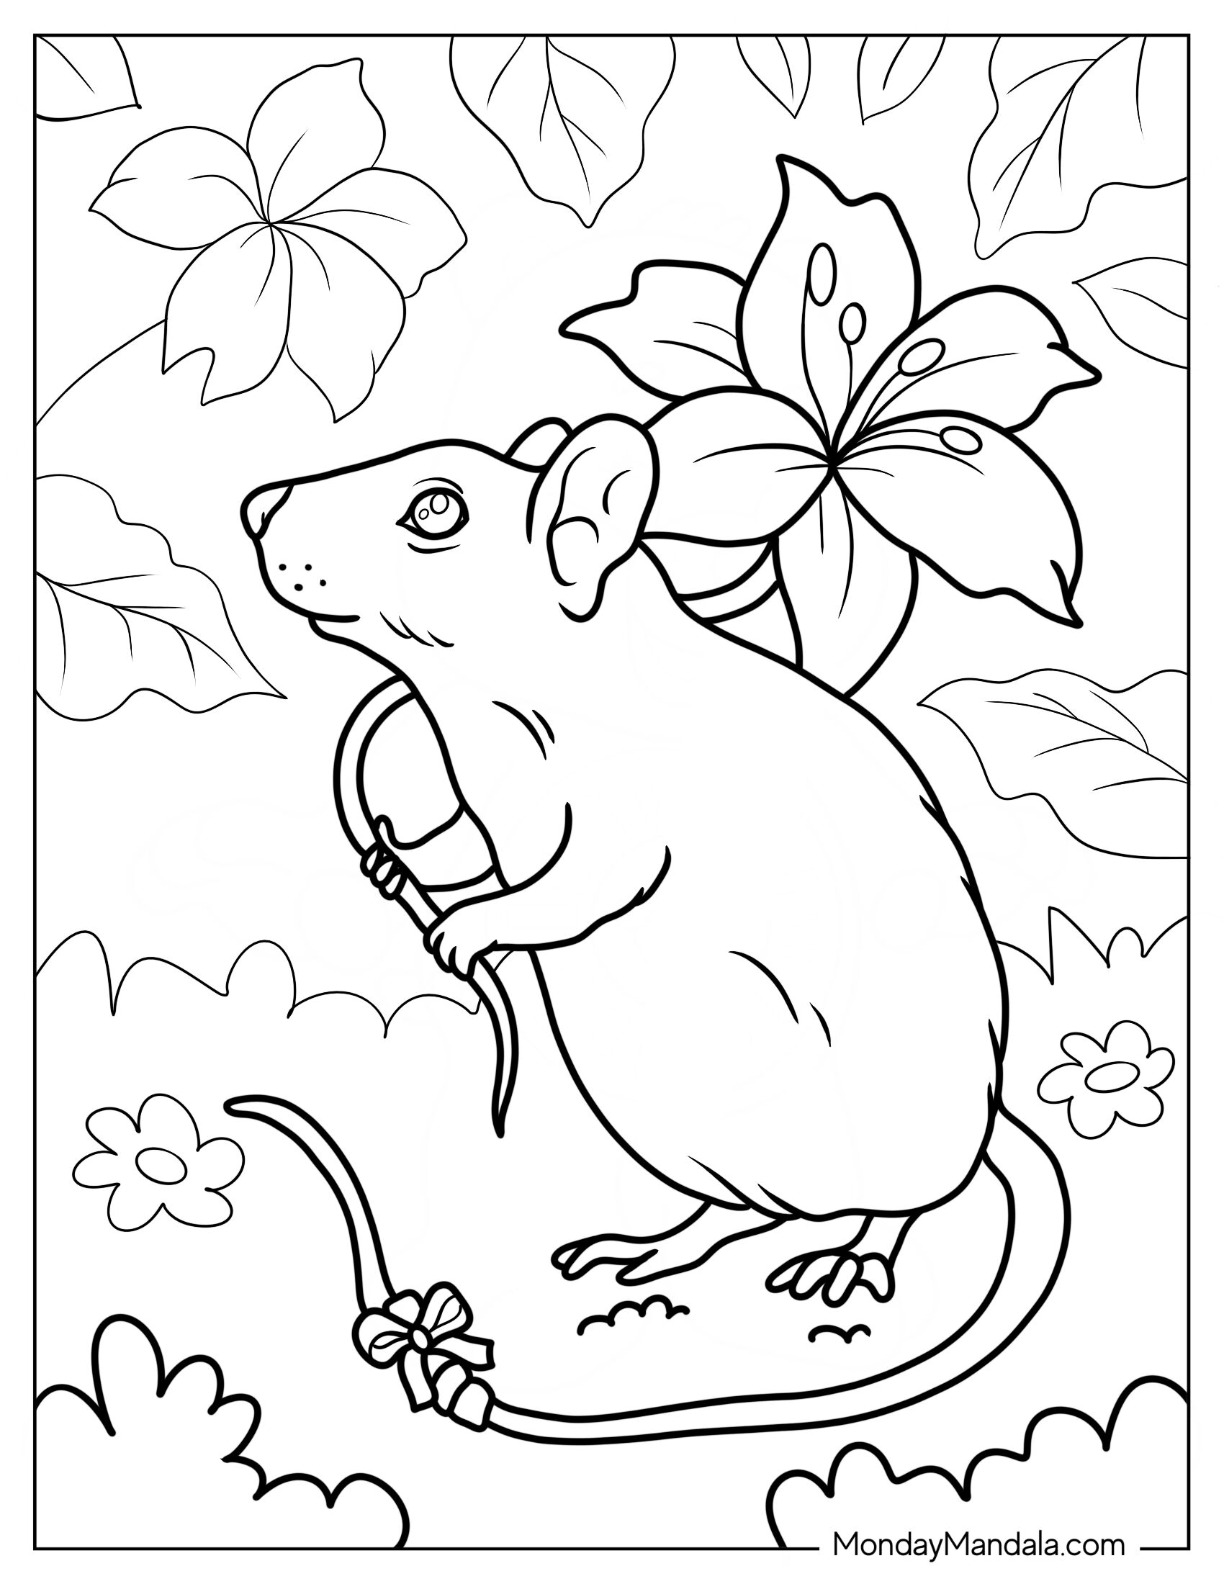 Mouse coloring pages free pdf printables